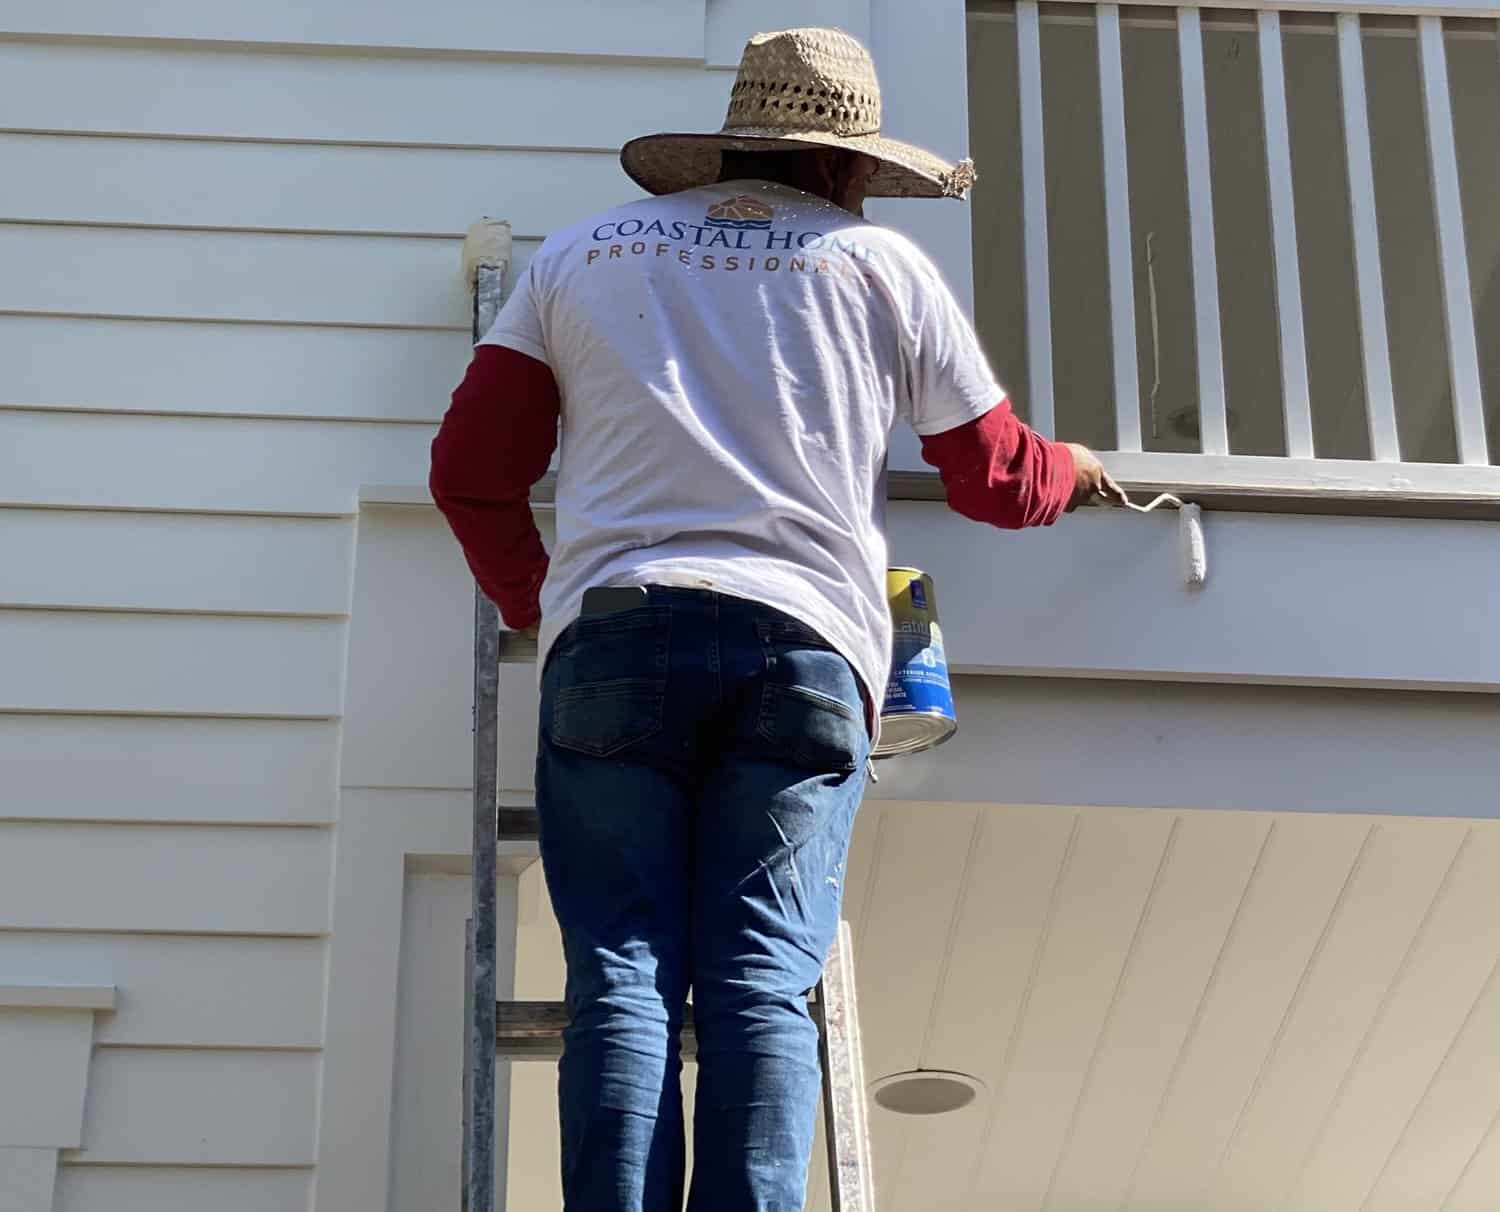 A Custom Home Professional Painter is on a ladder painting the siding of the home